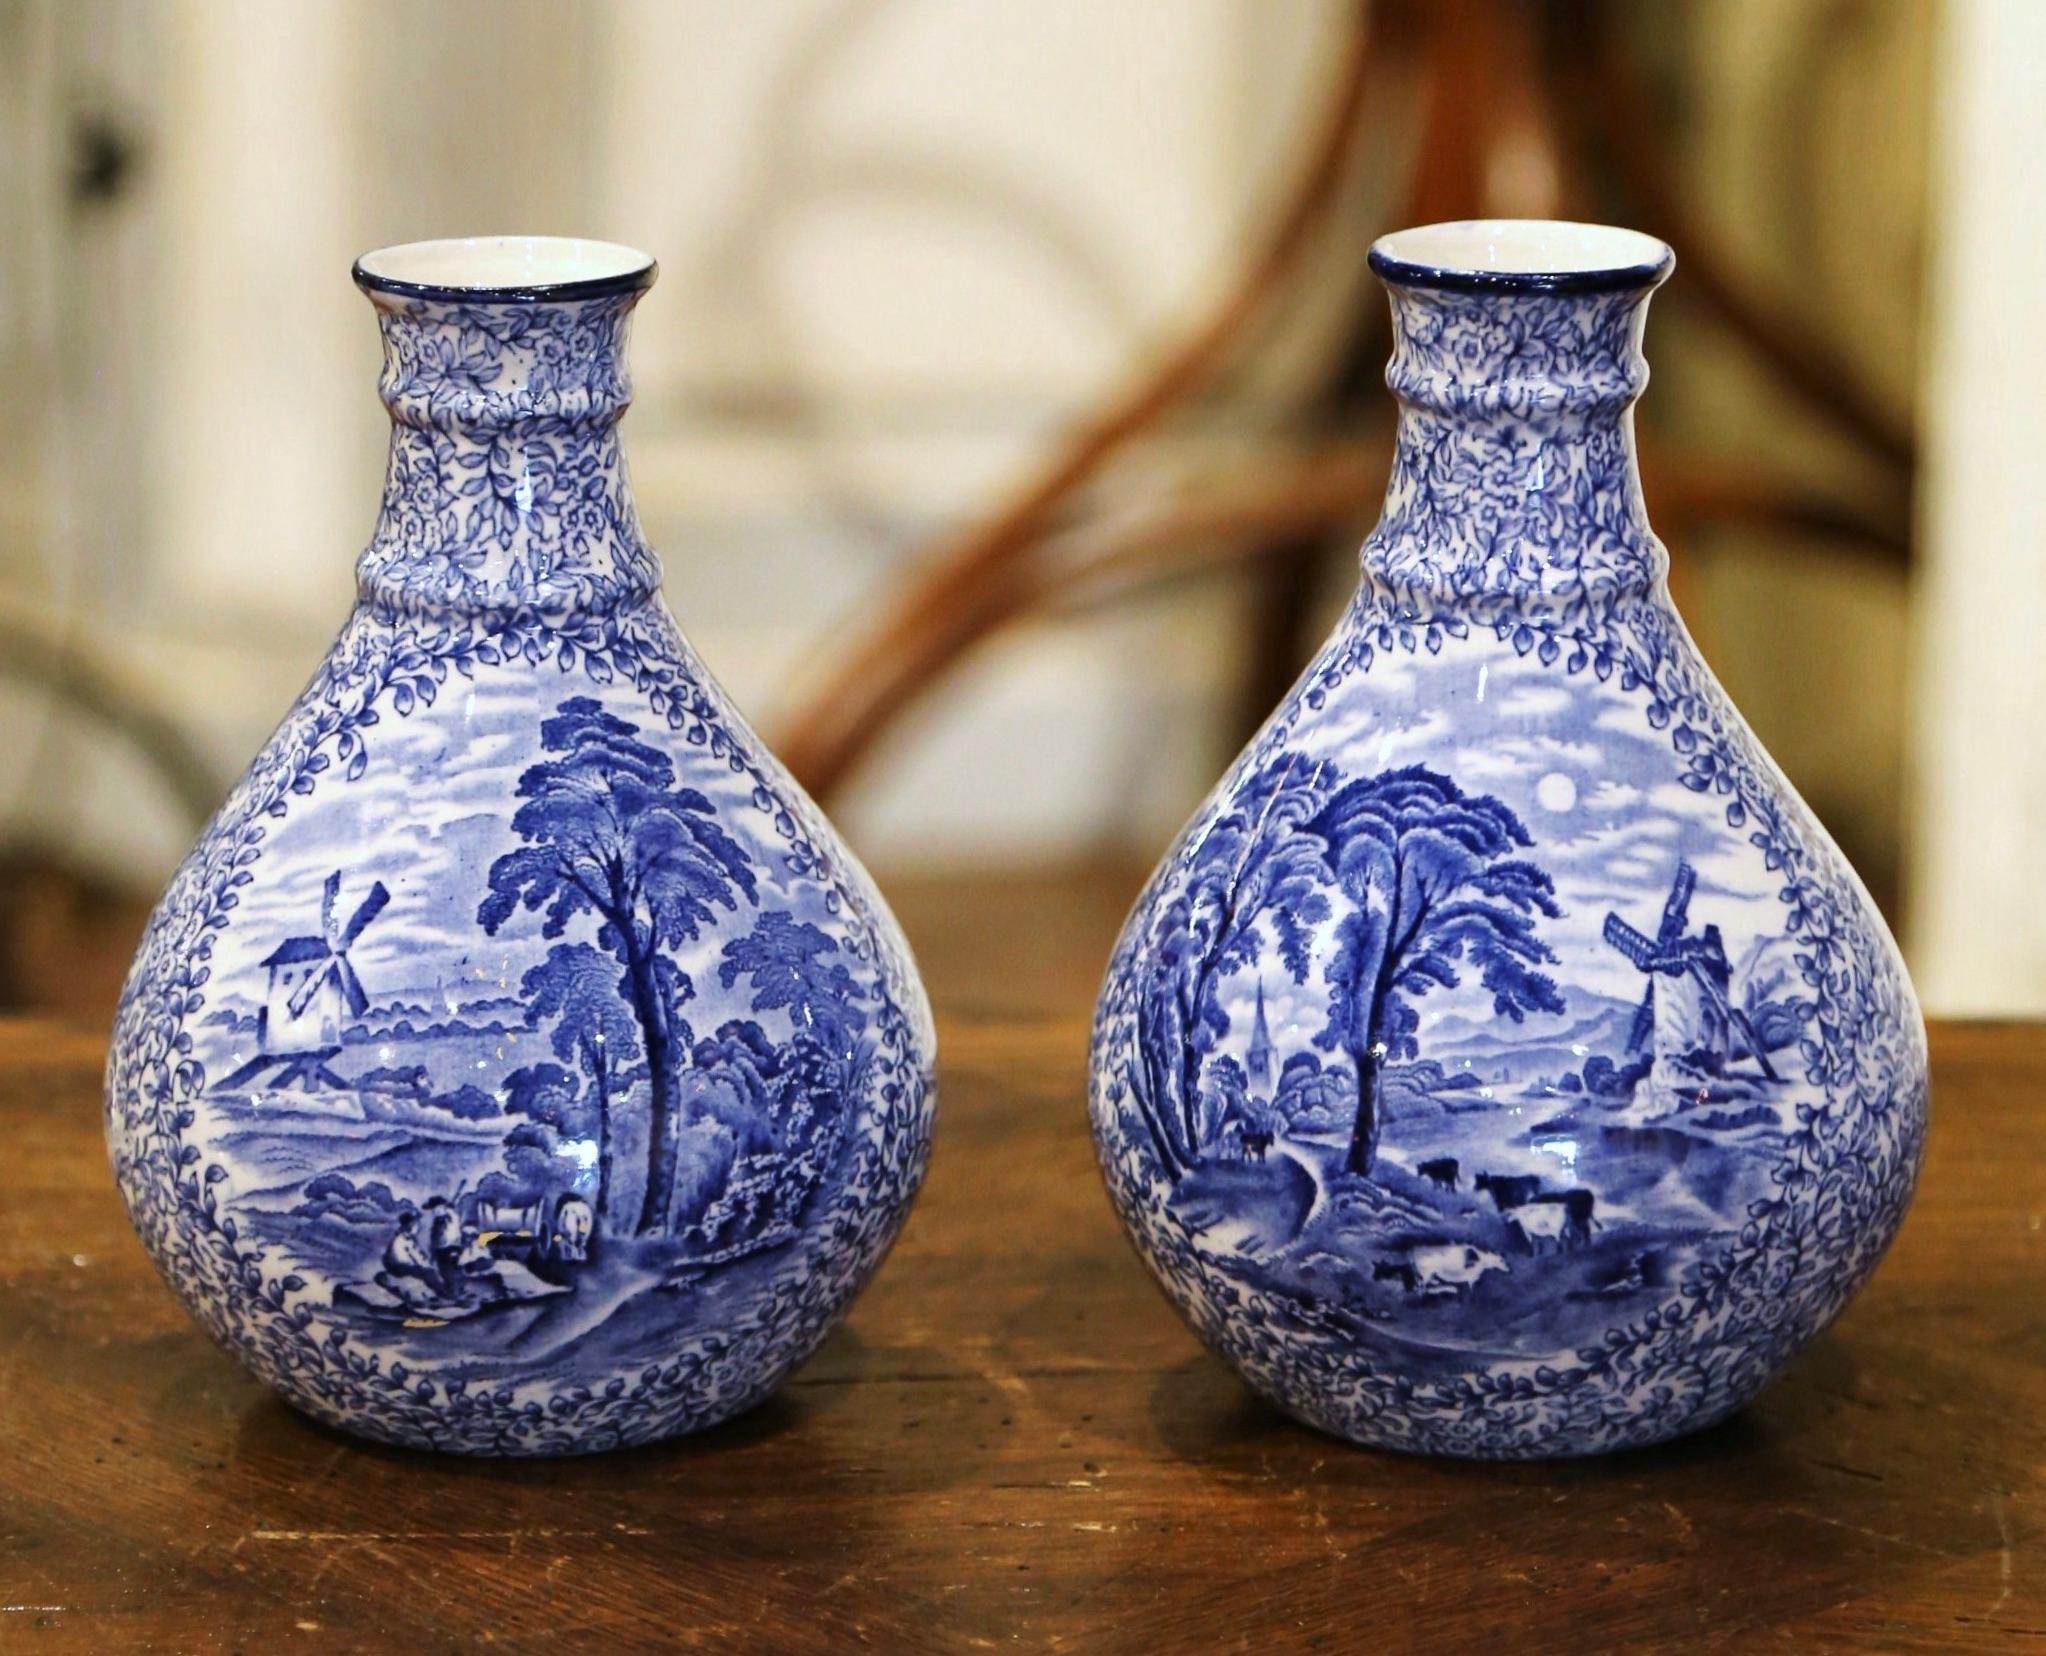 Ceramic Pair of Early 20th Century English Blue and White Painted Faience Delft Vases